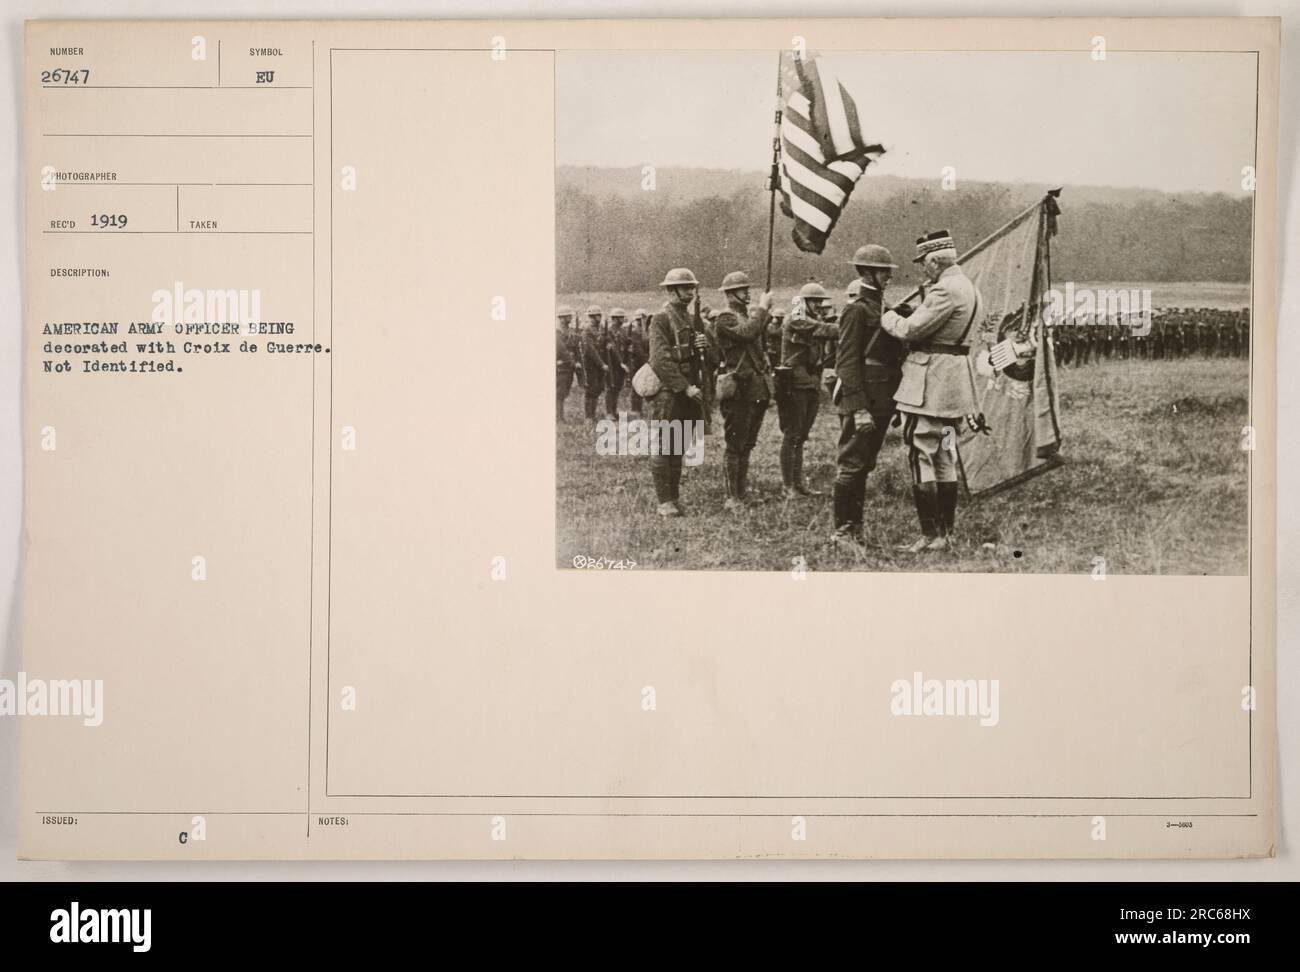 American army officer being decorated with the Croix de Guerre, an honor awarded for acts of valor during World War One. The identity of the officer in the photograph is unknown. Stock Photo